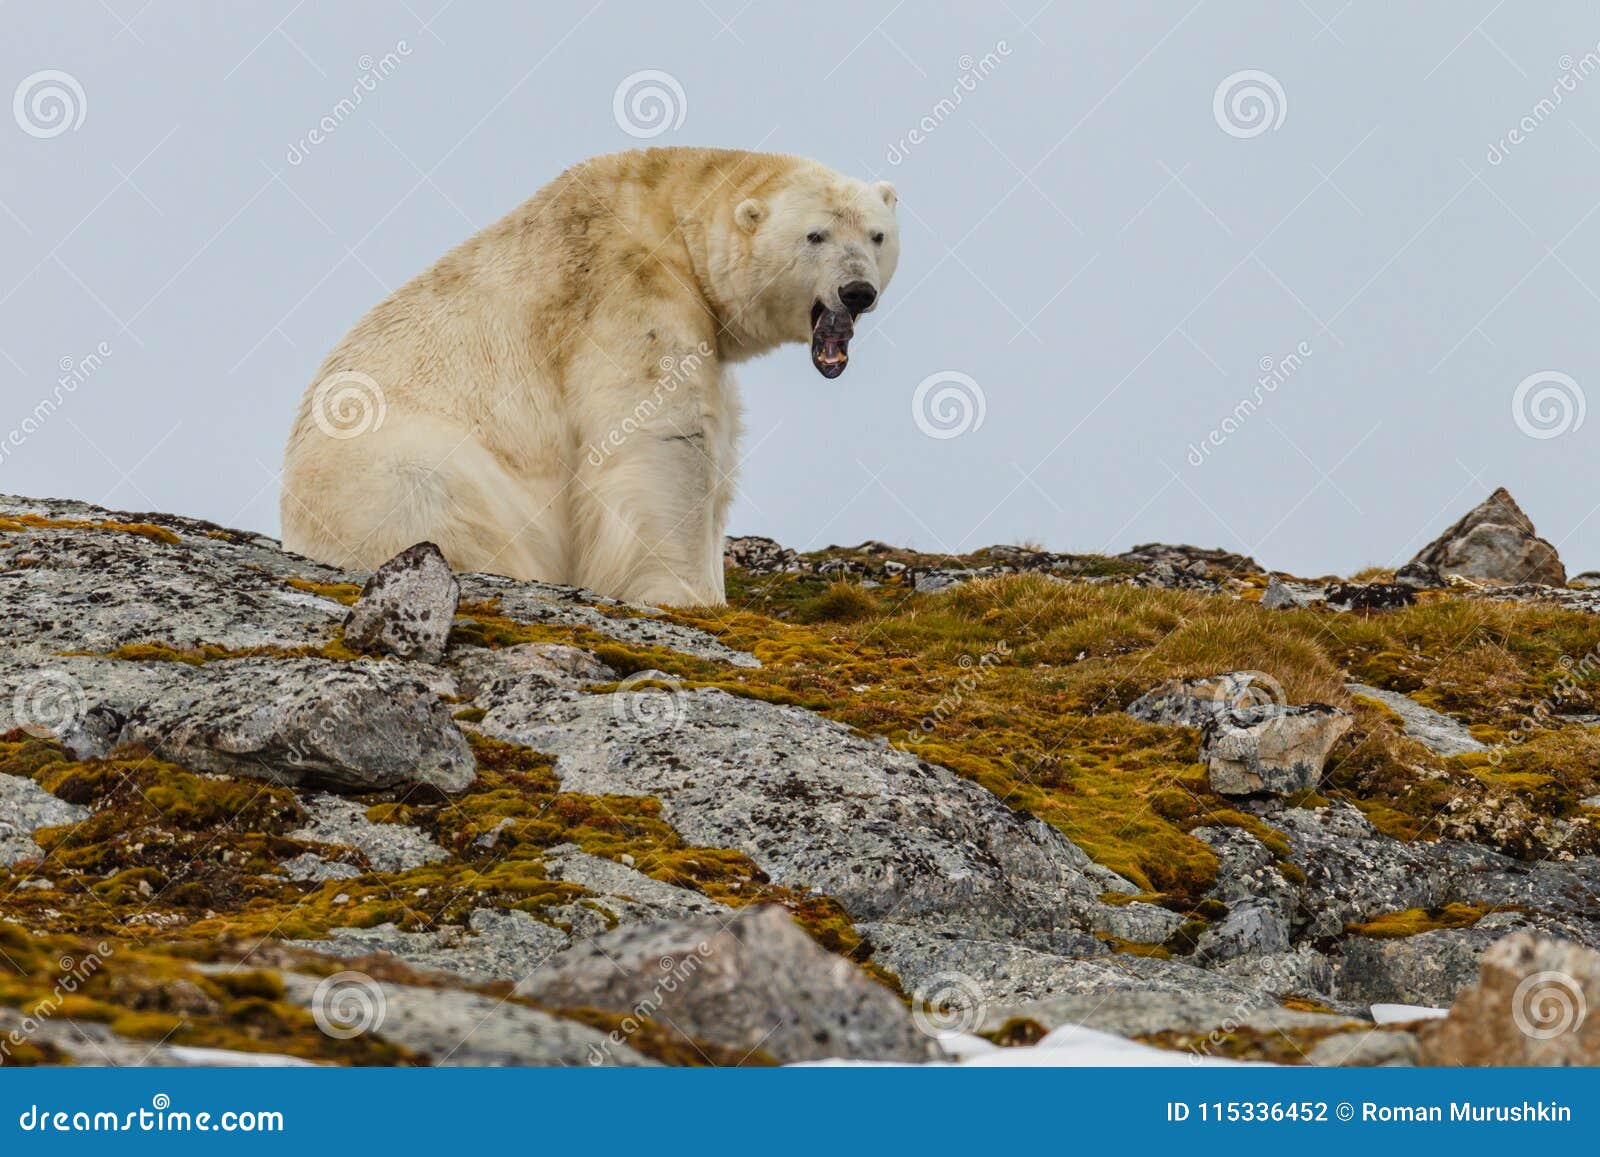 a polar bear sits and yawns on the stony hill